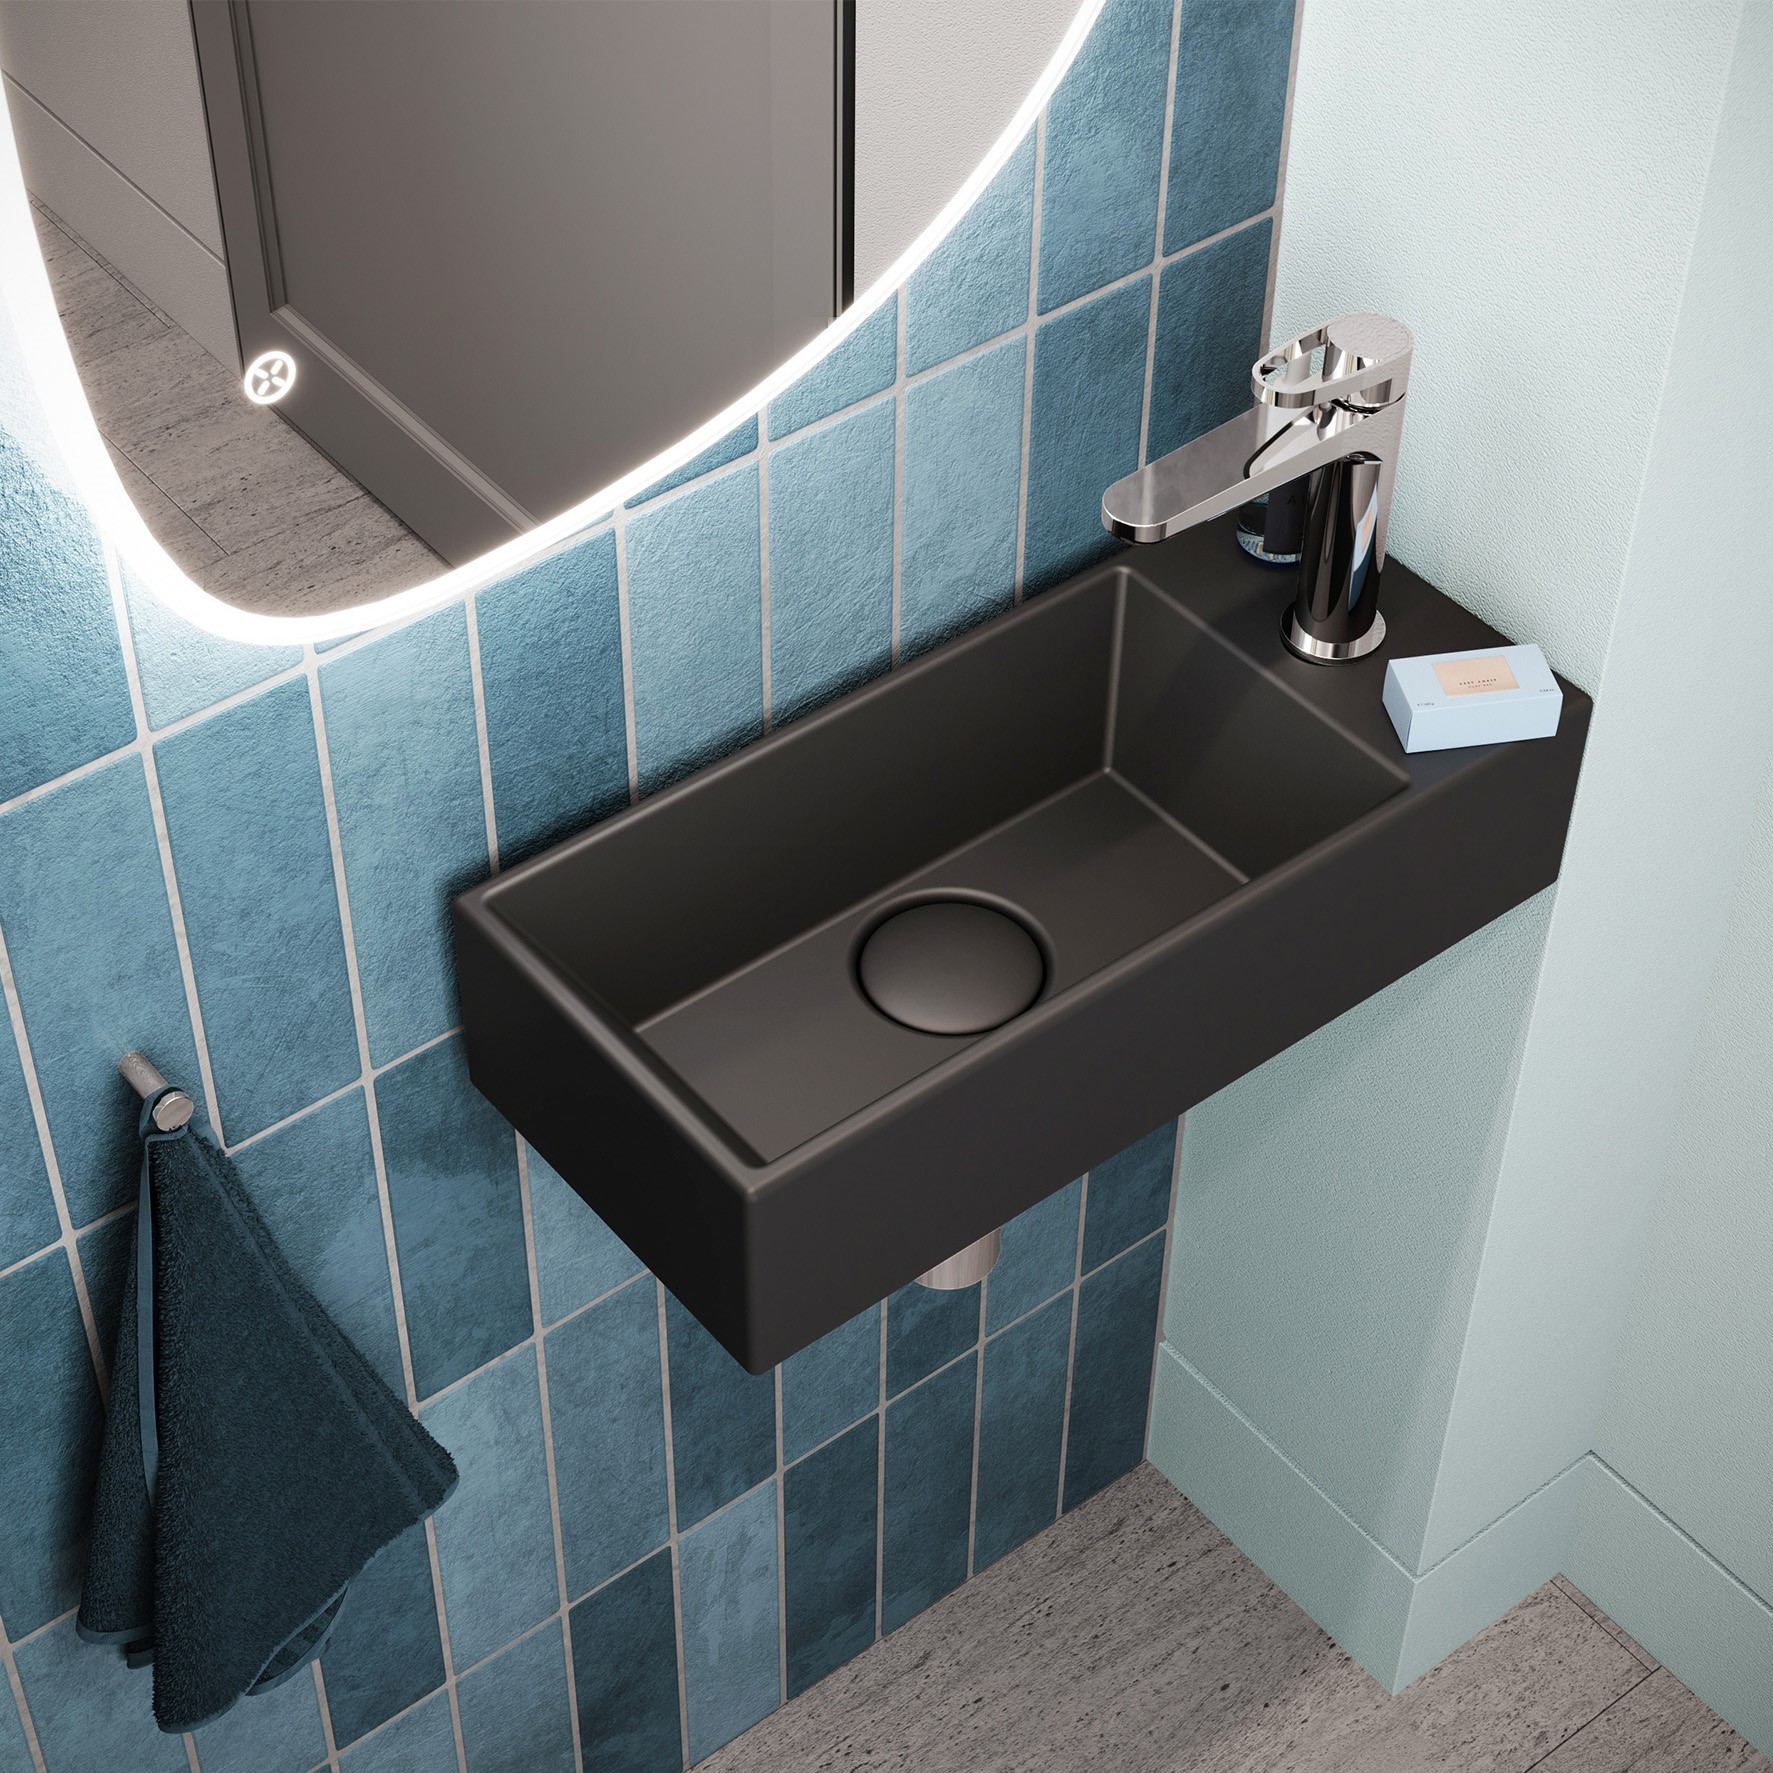 For luxurious, modern brassware design, look no further than LAZO.